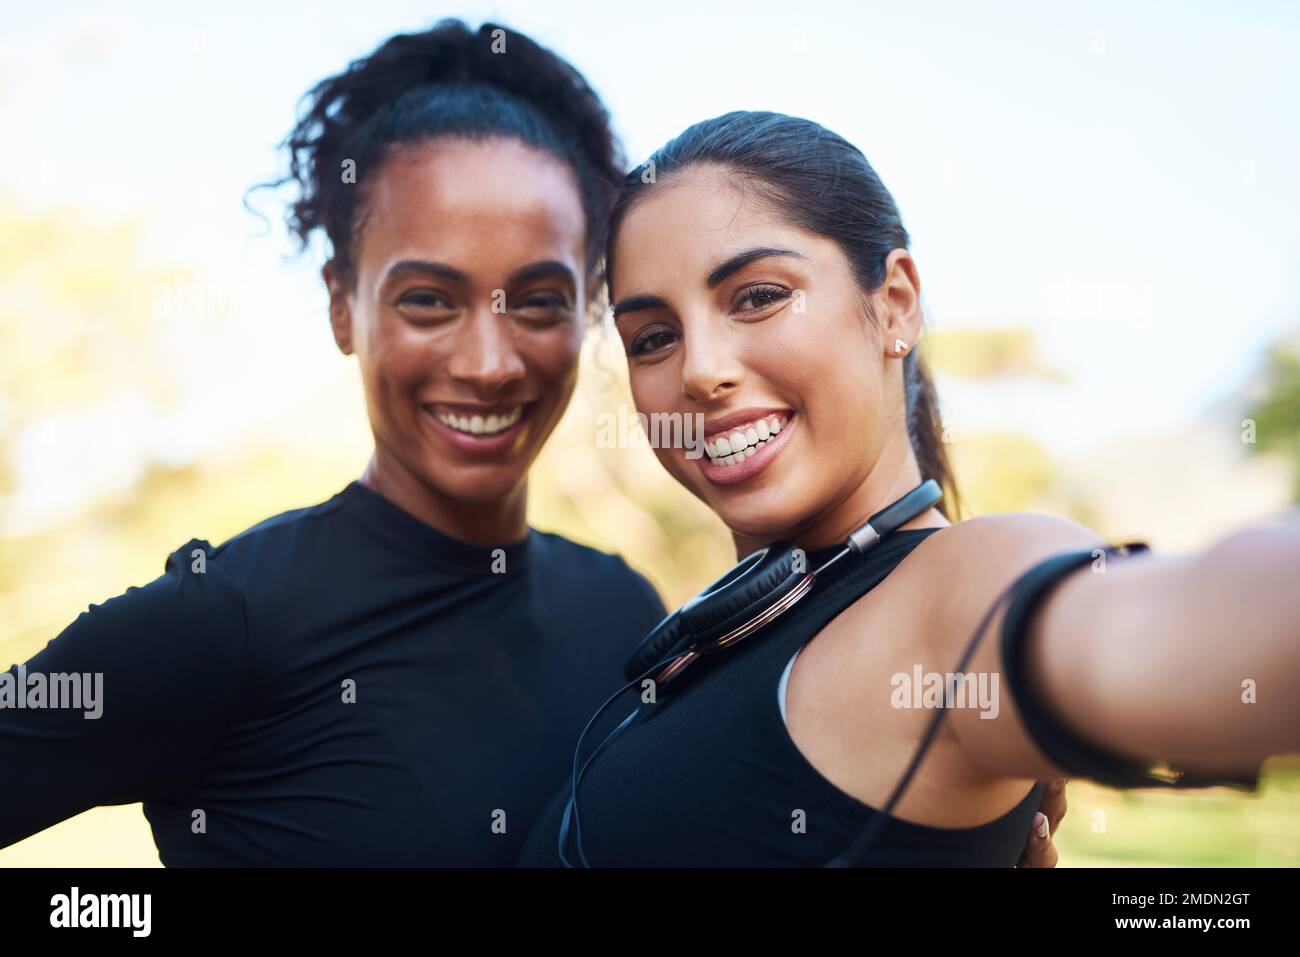 But first, lets take a selfie. Cropped portrait of two attractive young women posing for a selfie after their run together in the park. Stock Photo